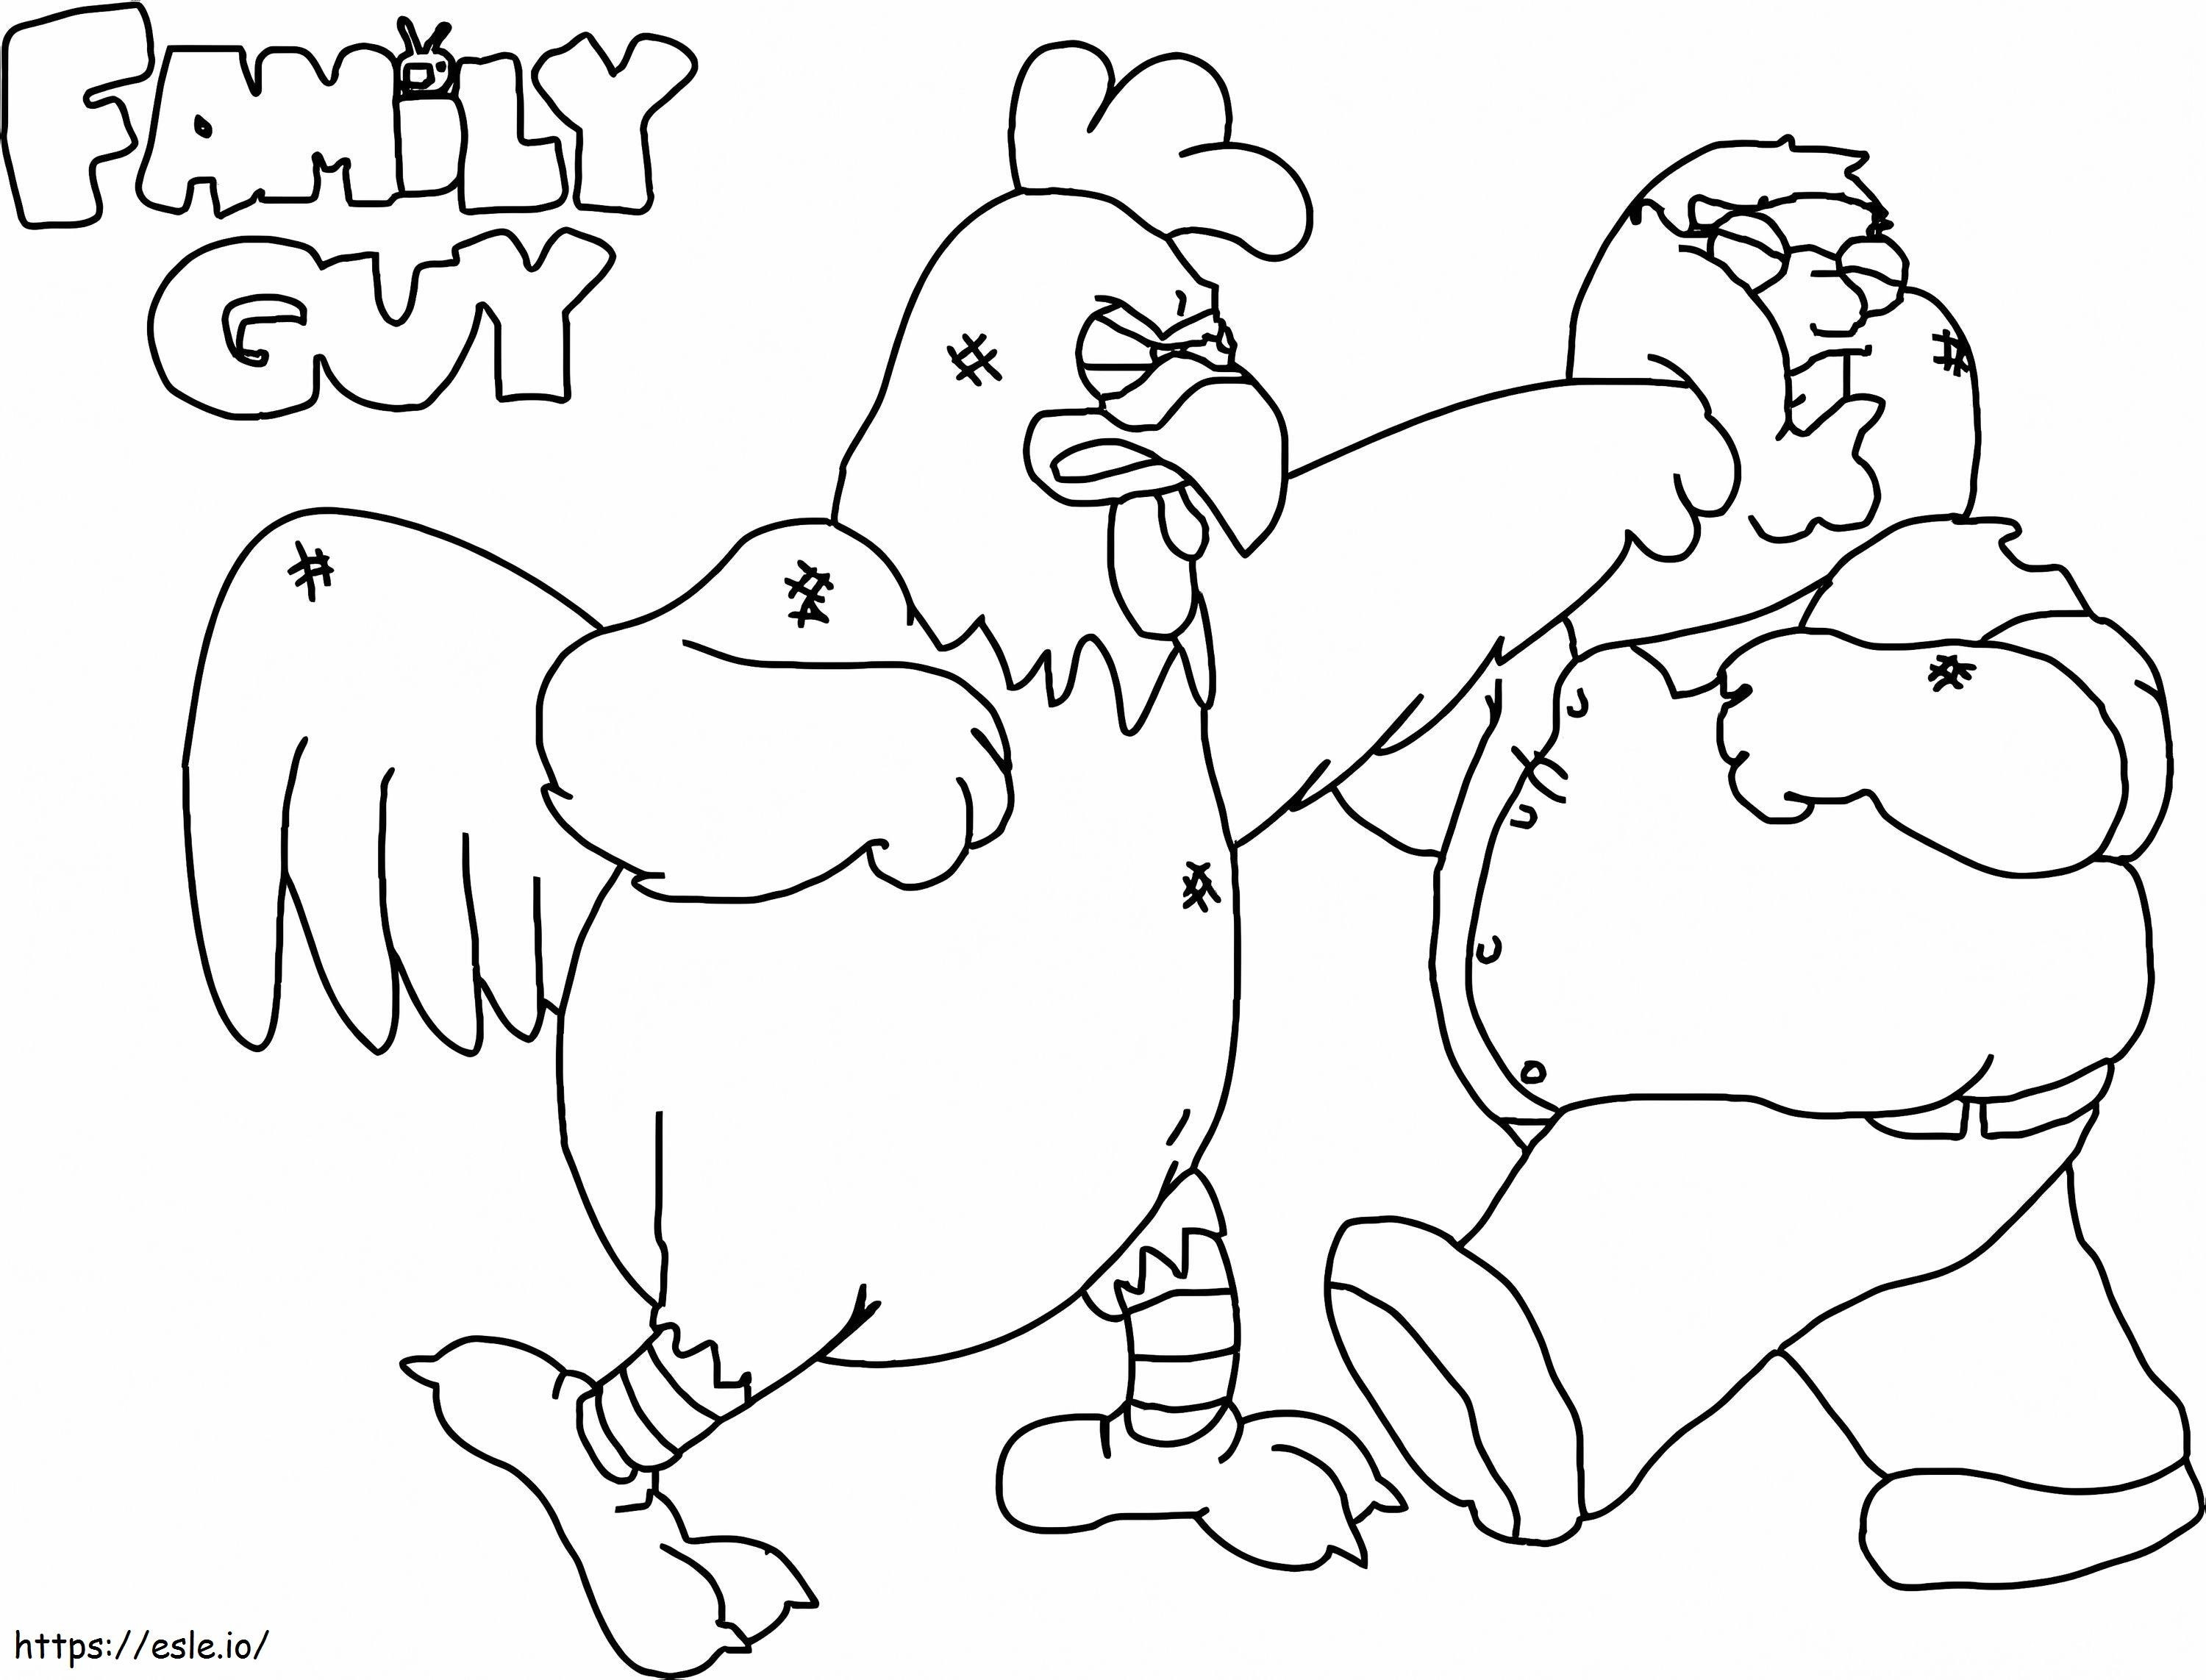 Peter And Chicken Fighting coloring page